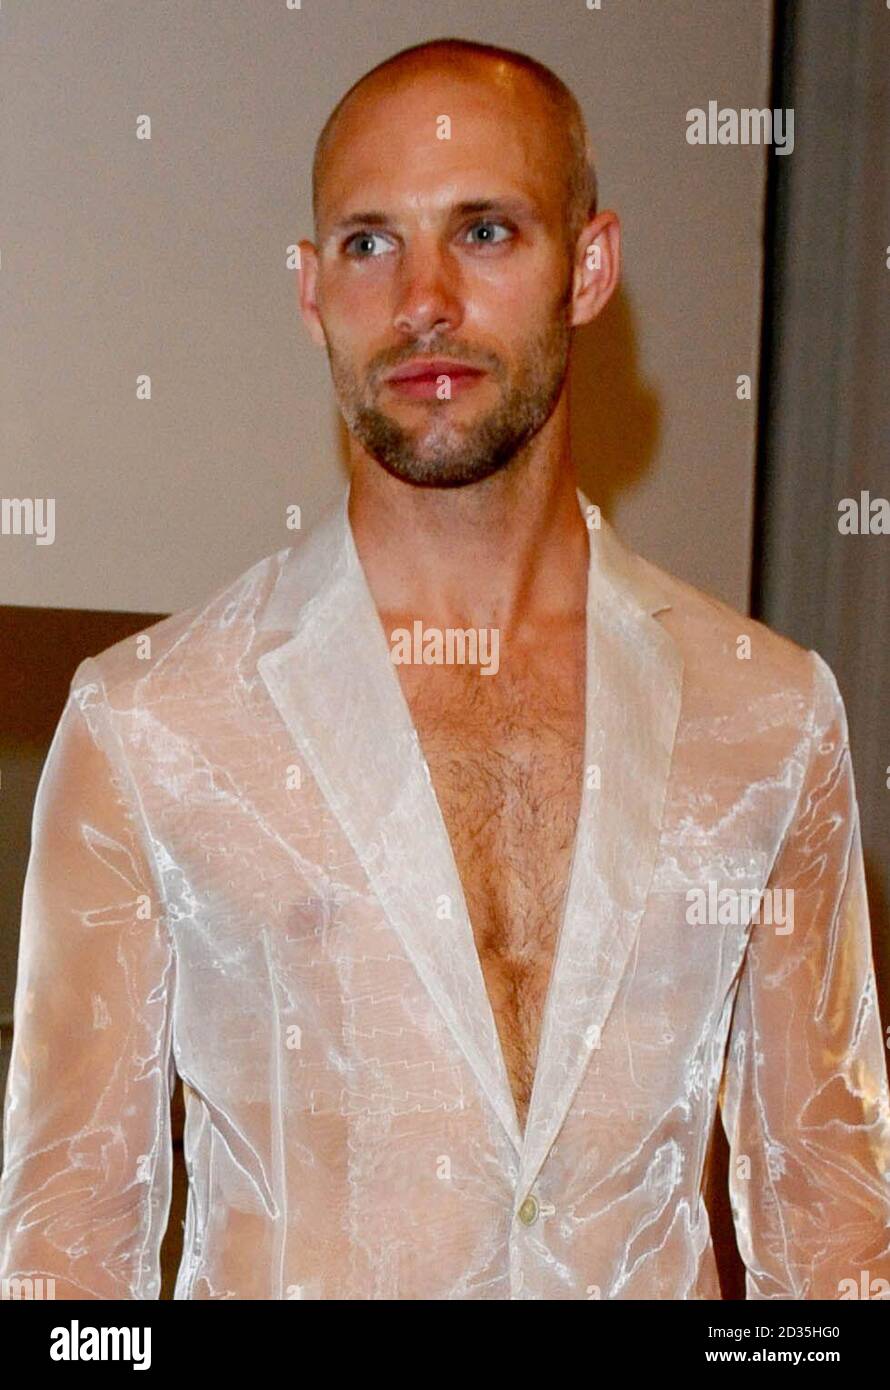 A see through suit designed by Richard James and Spencer Tunick at the Esquire Singular Suit Launch Party at Somerset House, in London. PRESS ASSOCIATION Photo. Picture date: Wednesday 29, July 2009. Photo credit should read: Ian West/ PA Wire Stock Photo